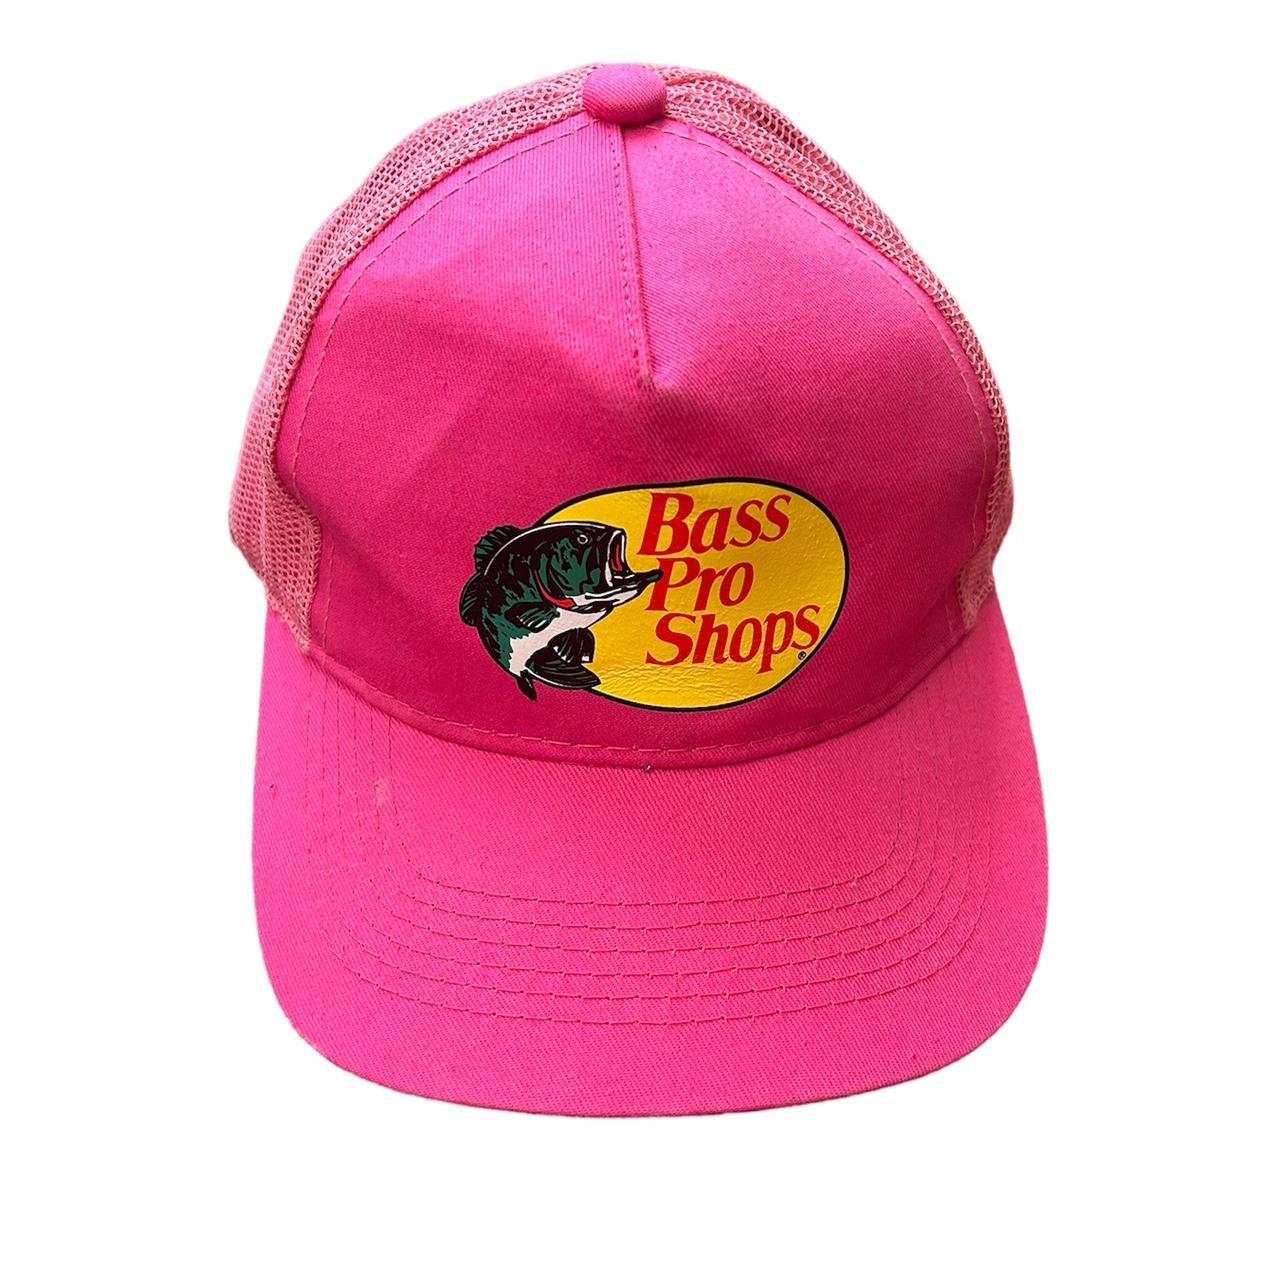 Hot pink bass pro shop hat. Youth sized